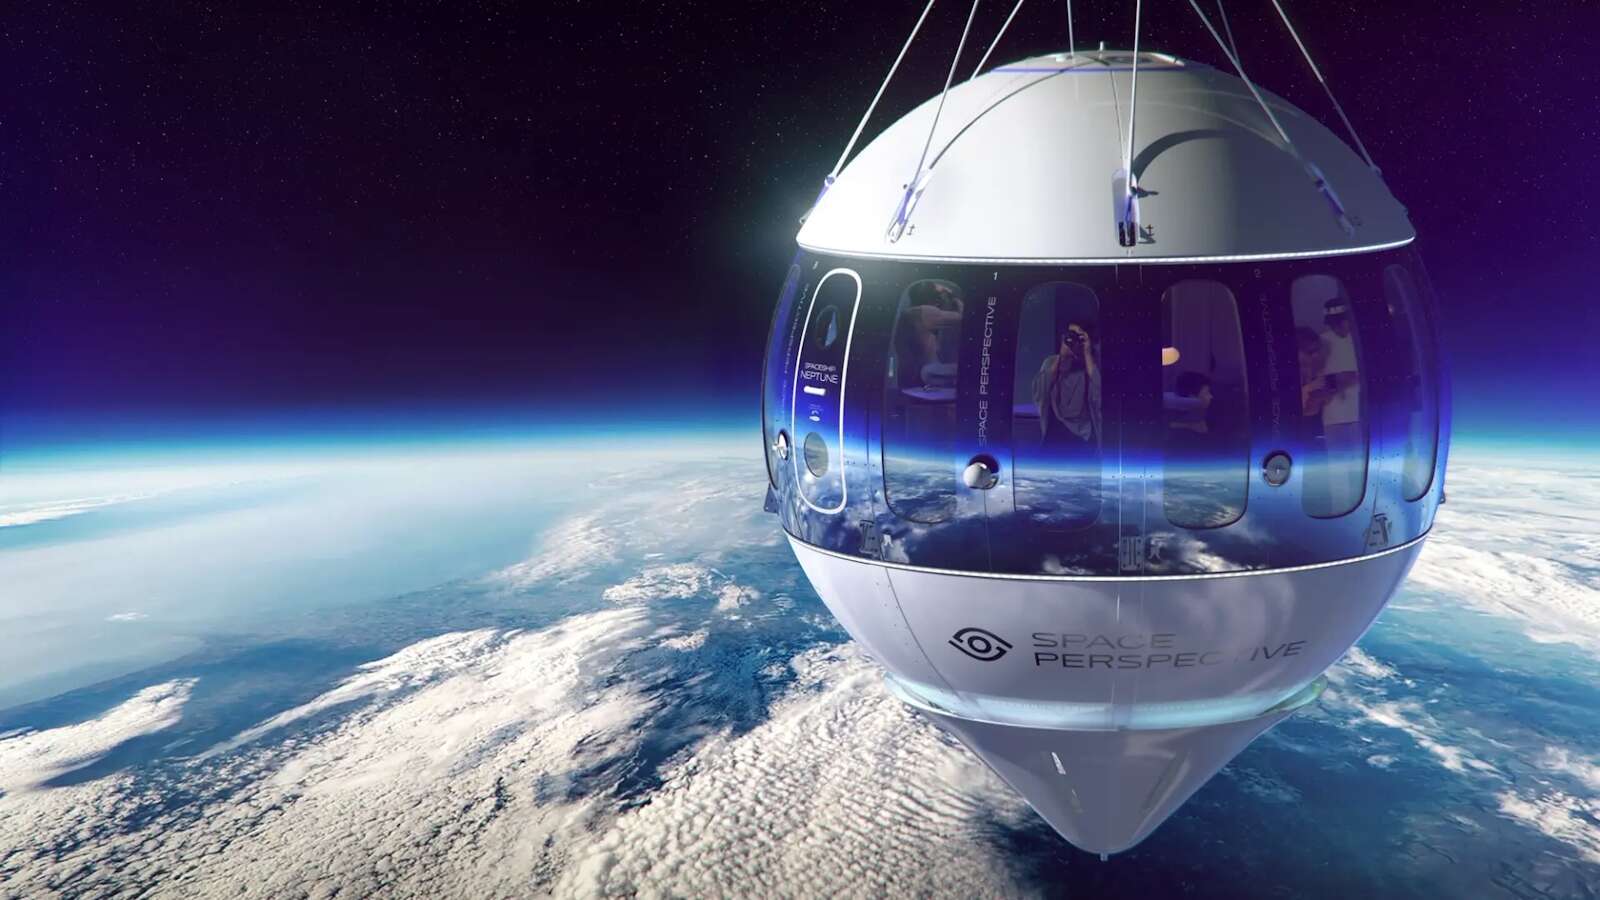 A startup company unveils its capsule for amazing and luxurious trips to the gates of space